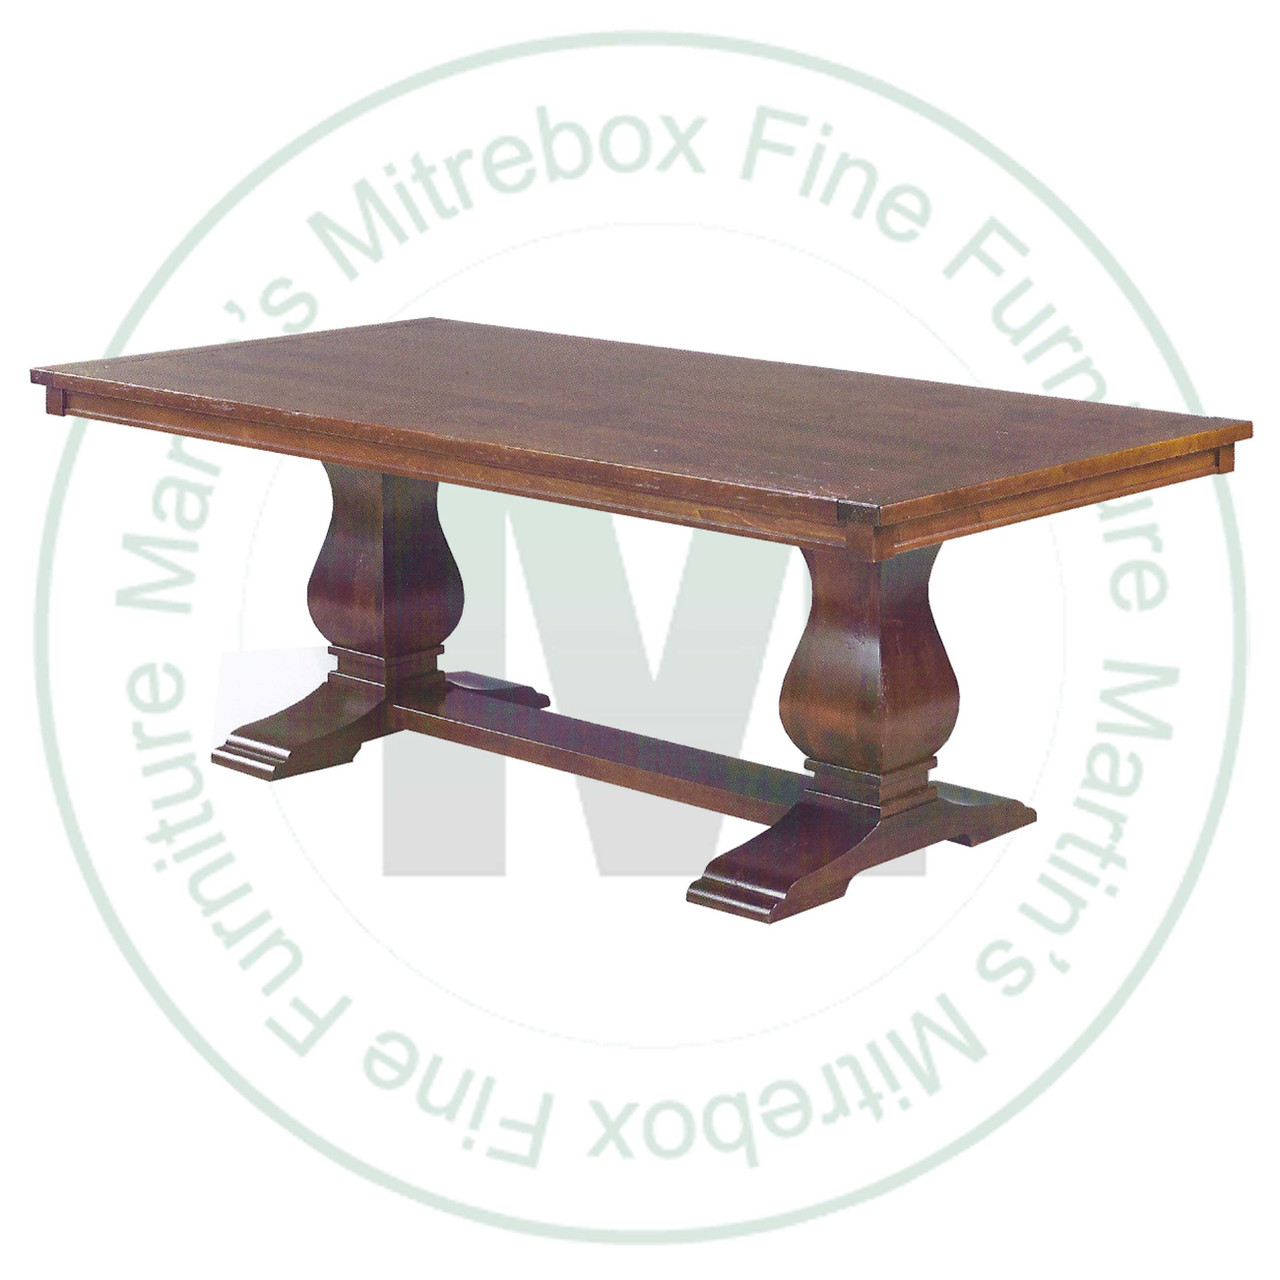 Oak Socrates Double Pedestal Table 48''D x 84''W x 30''H With 2 - 12'' Leaves. Table Has 1.25'' Thick Top